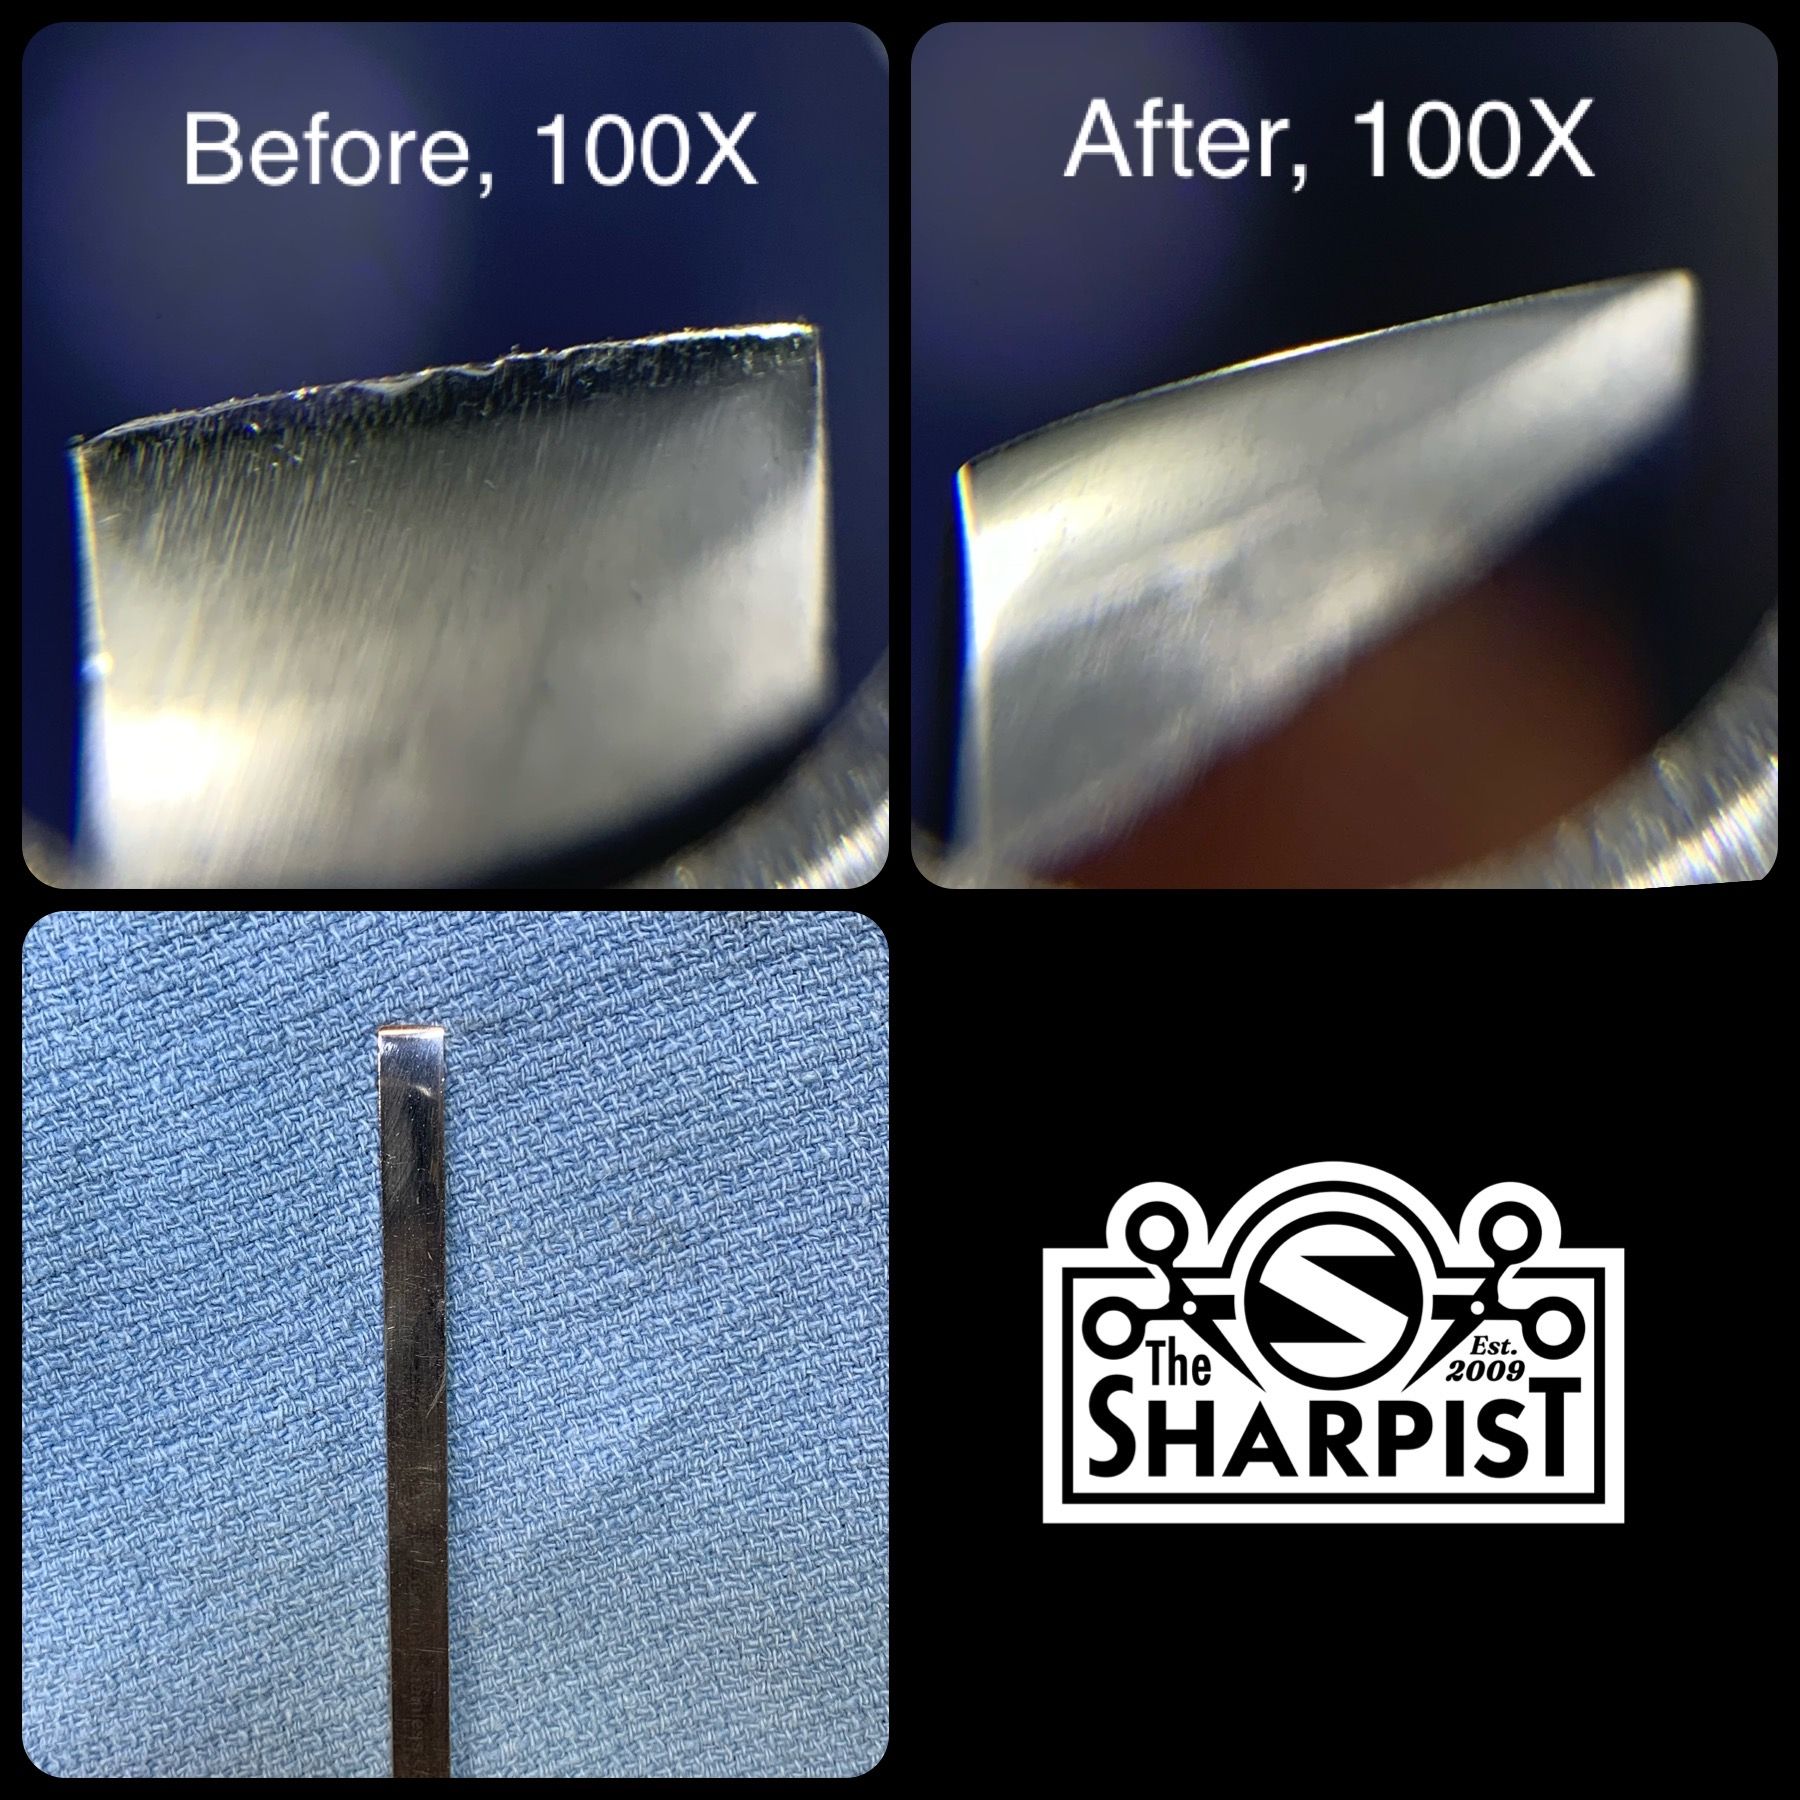 Magnified before and after sharpening photos of an osteotome